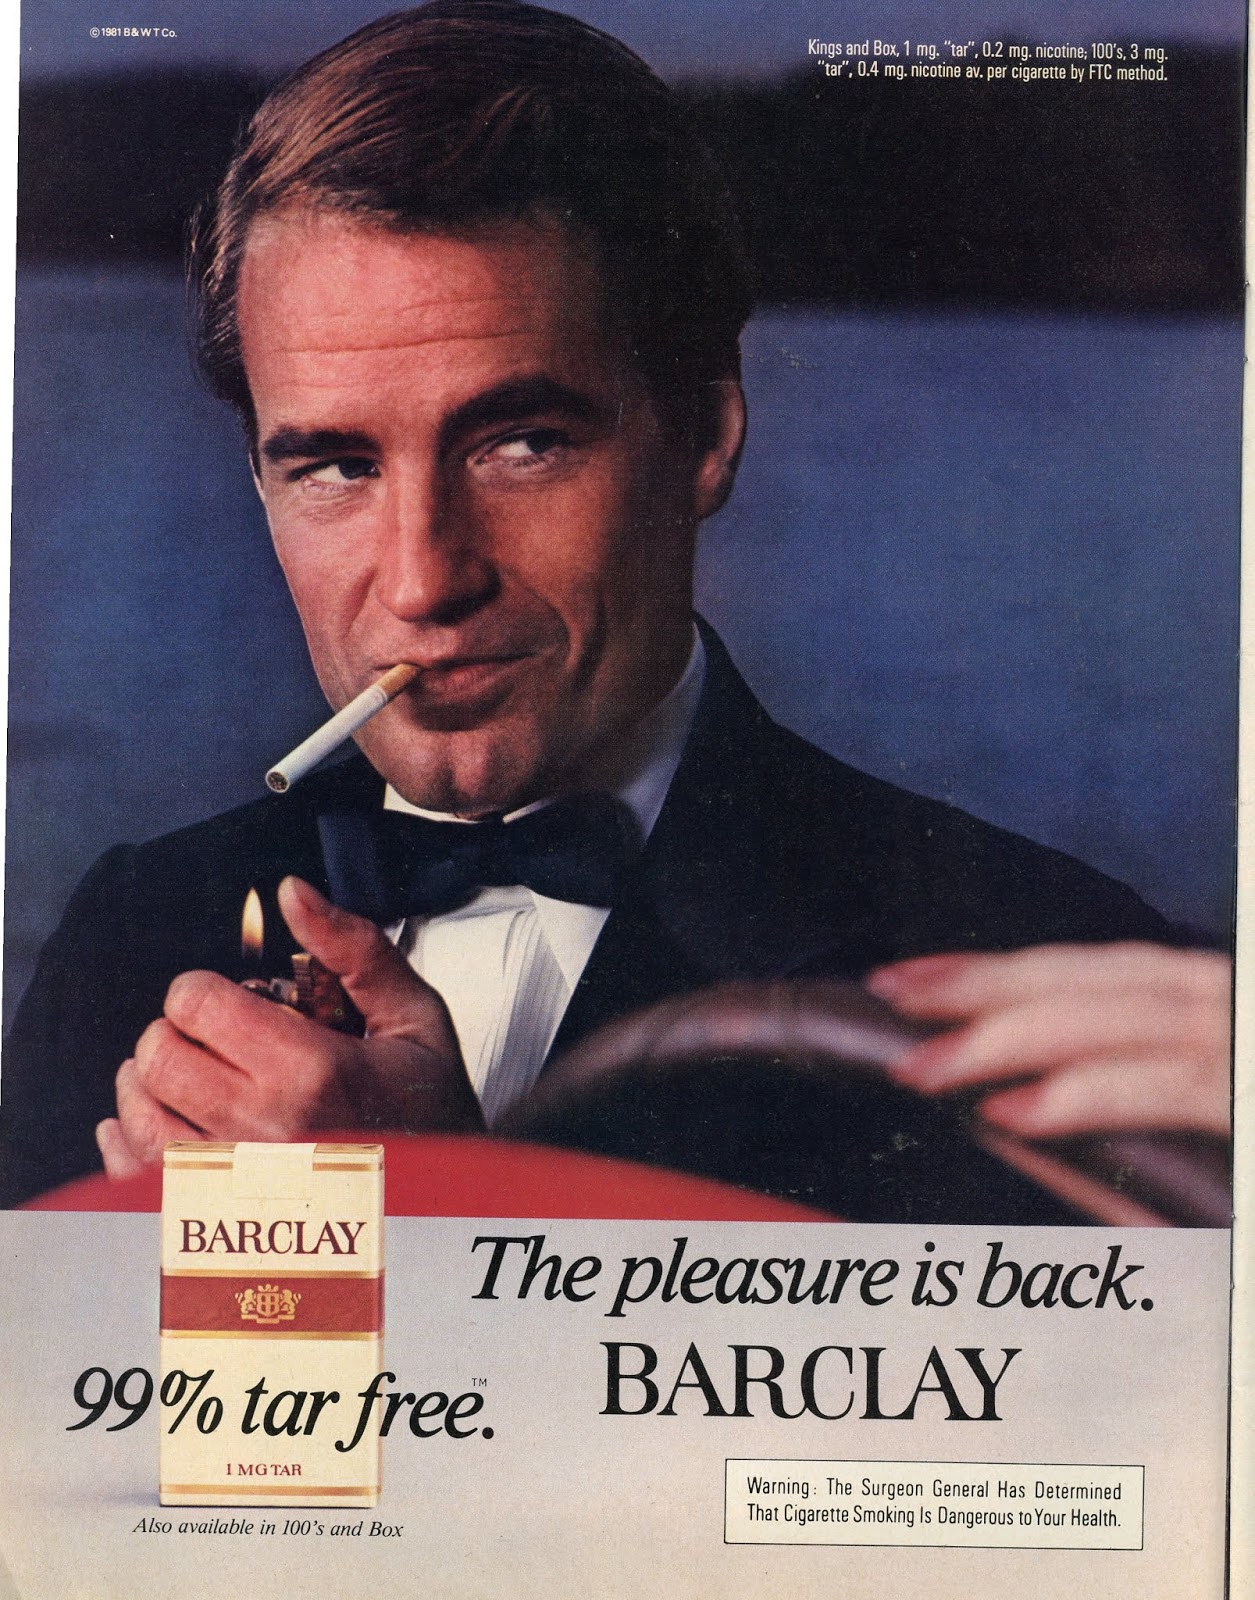 Scanned Vintage Graphics: The Pleasure is Back. Barclay cigarettes